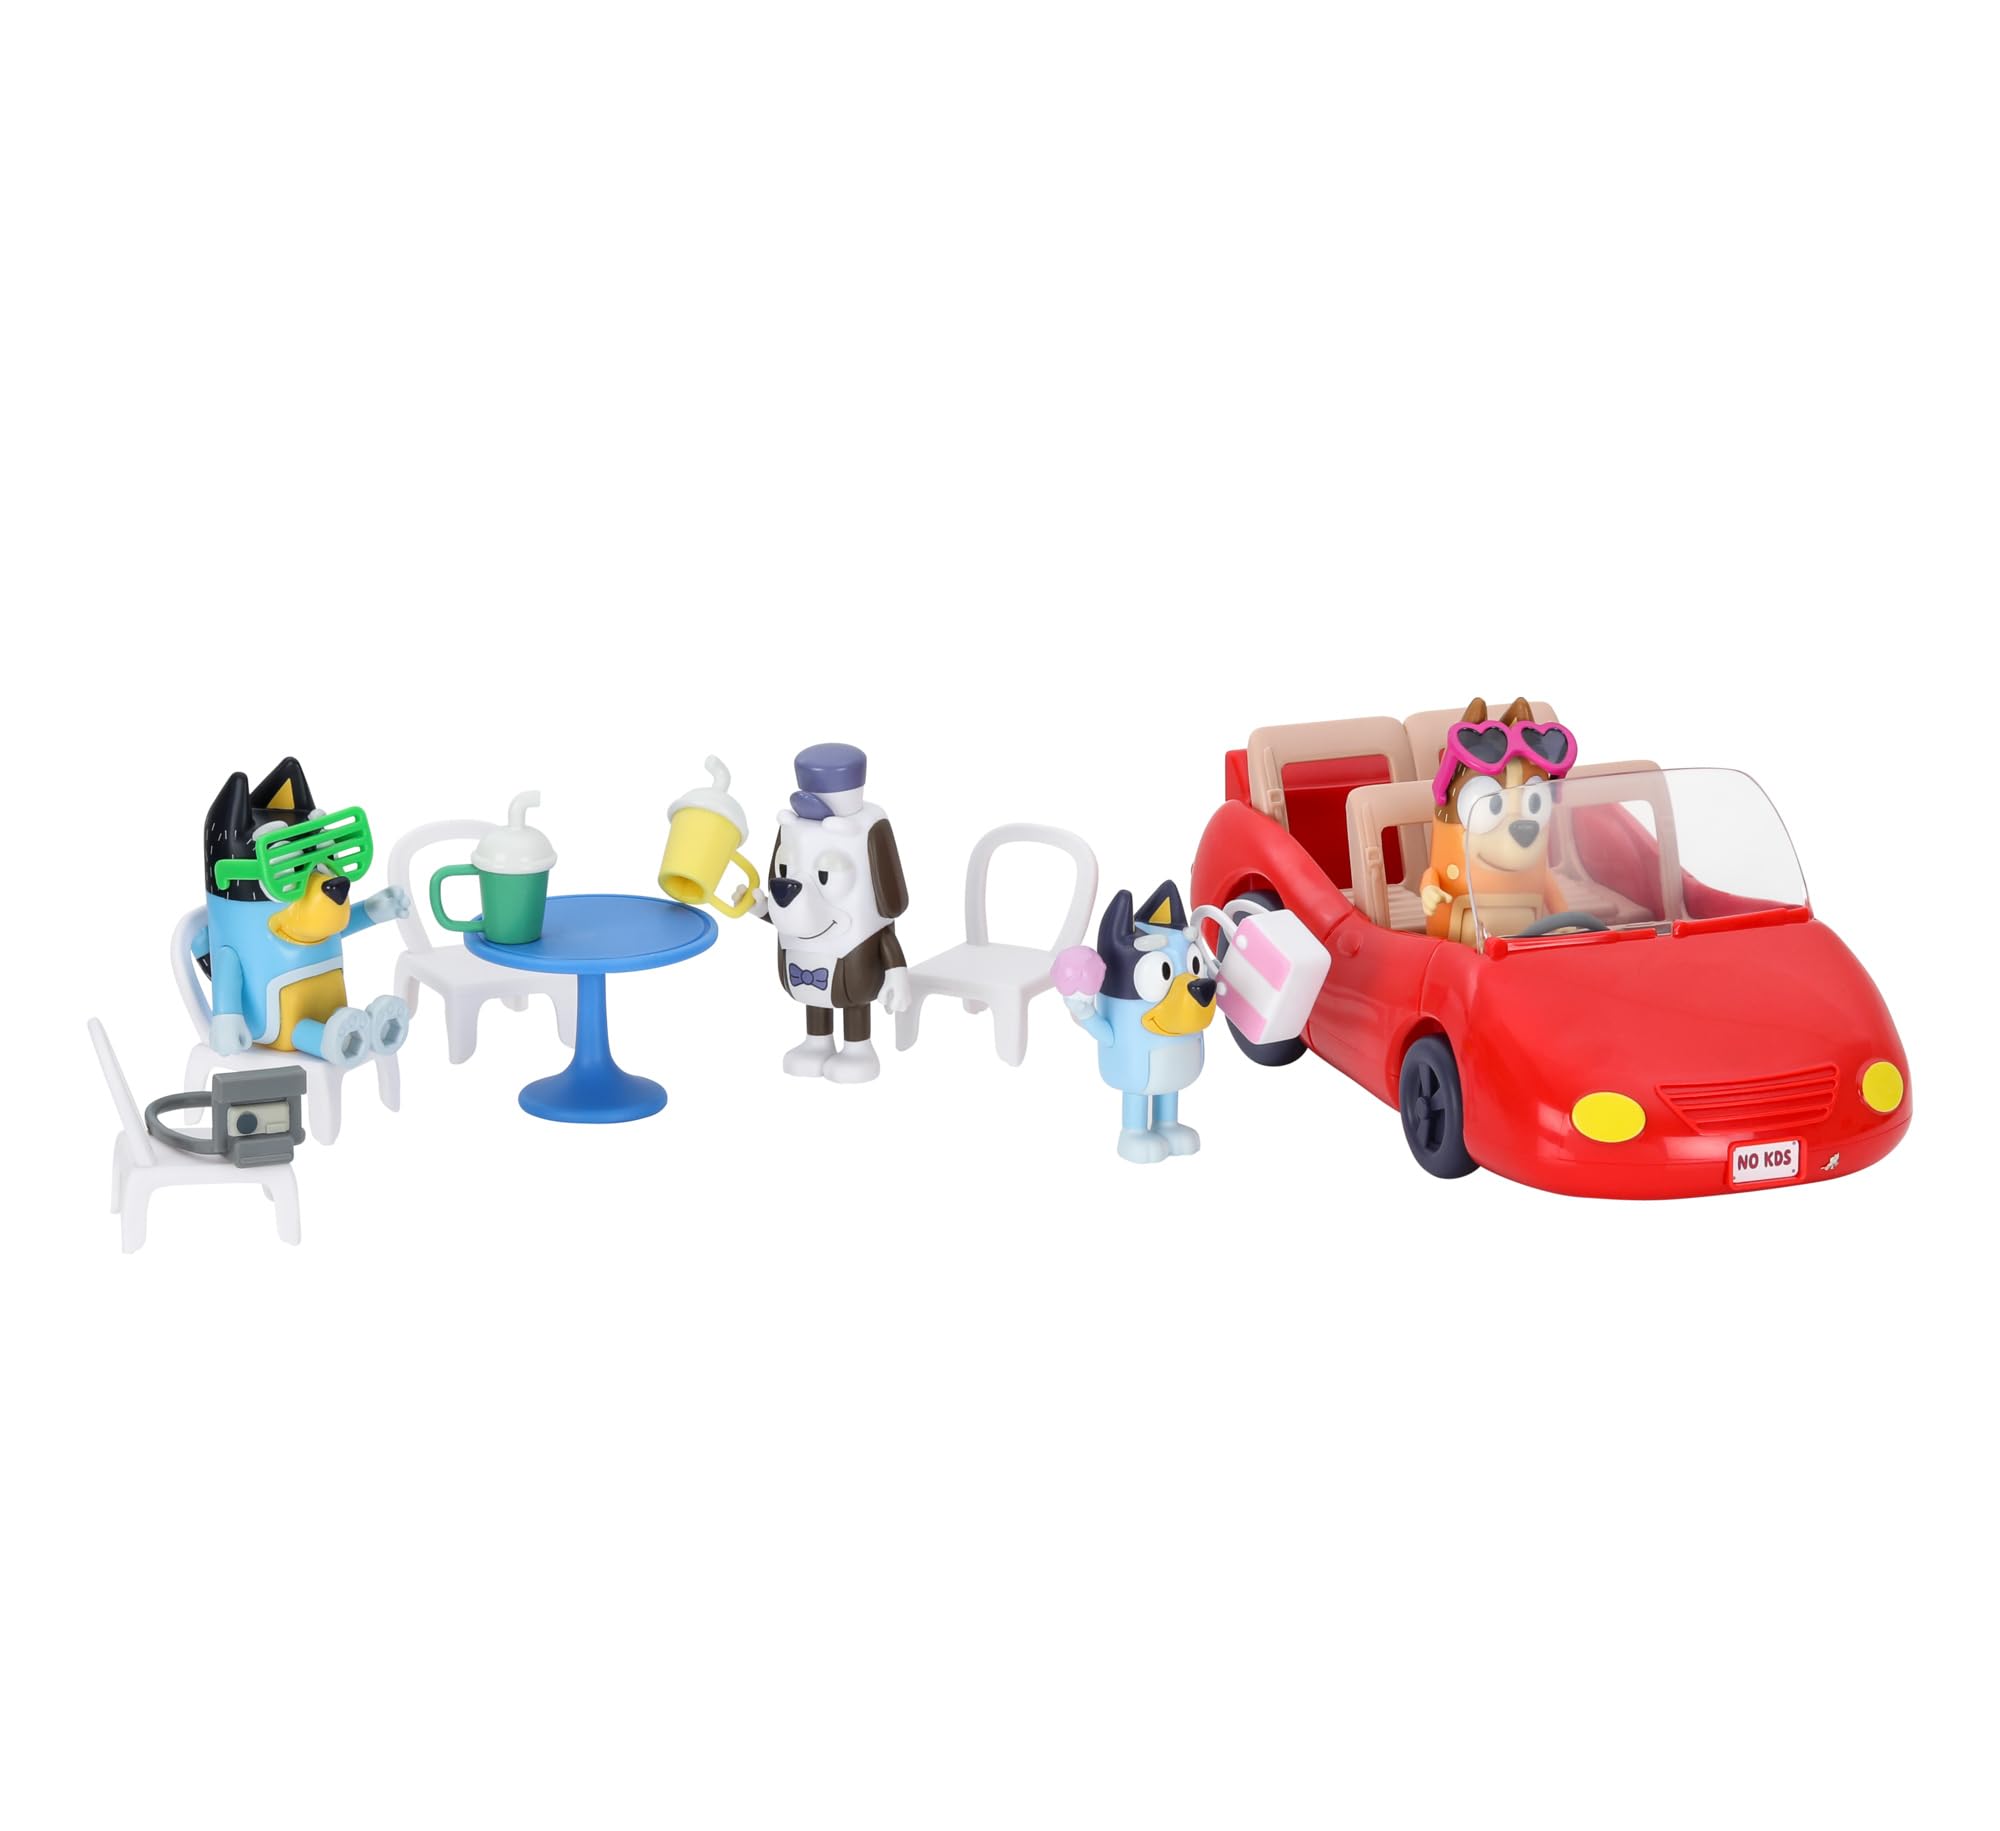 Bluey Vehicle and 4 Figure Pack, Escape Convertible with Four 2.5 Inch Figures, 9 Accessories and Sticker Sheet | Amazon Exclusive